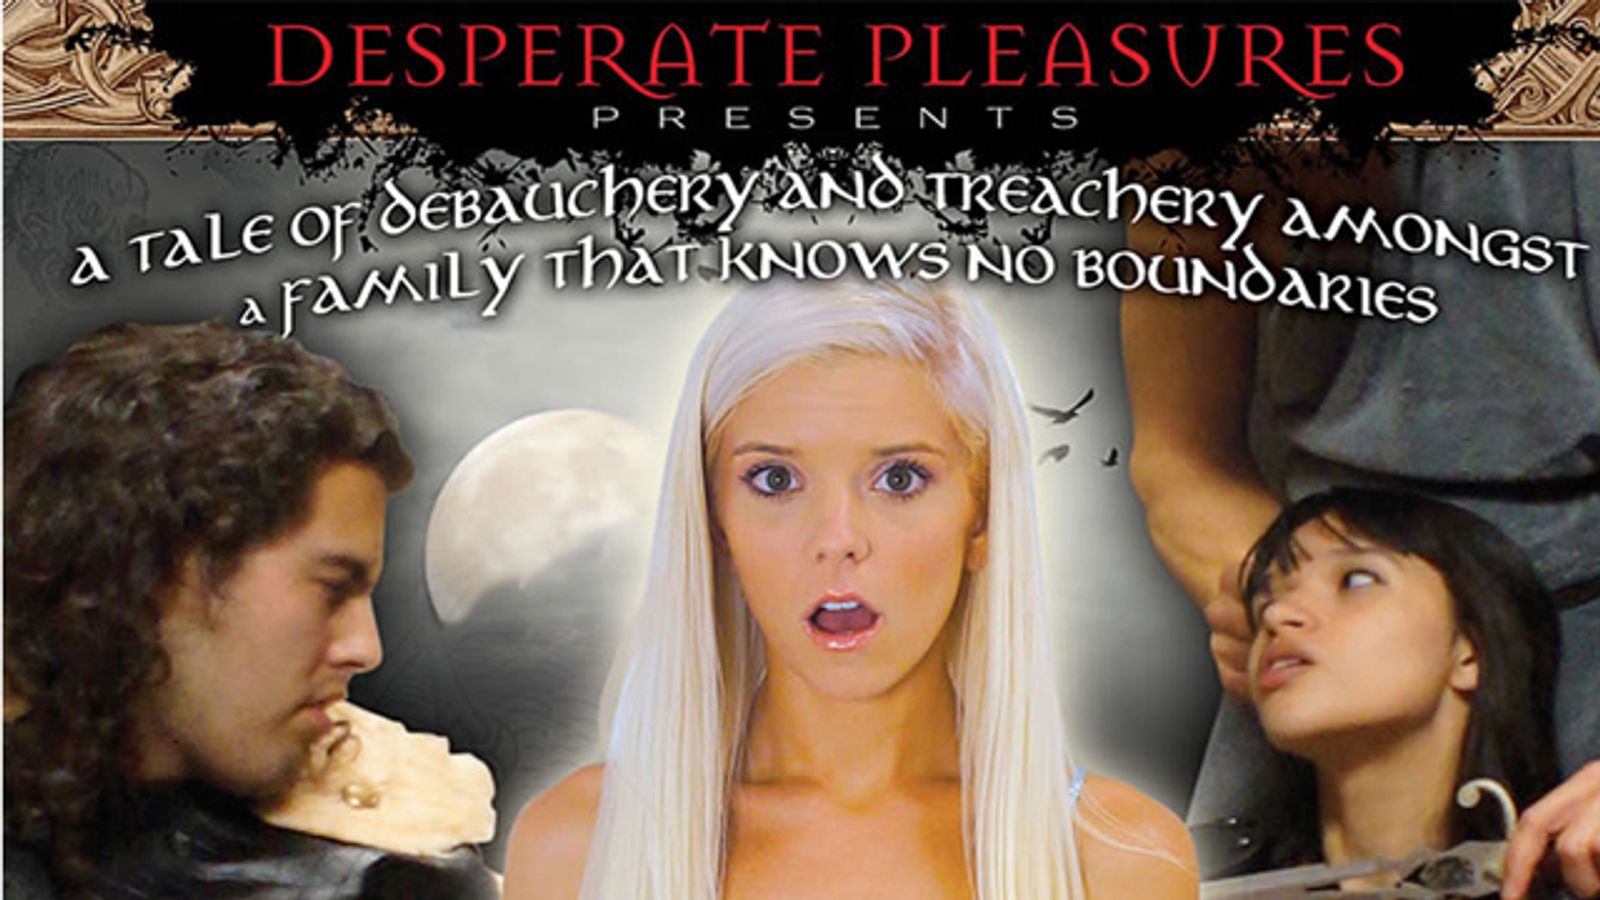 Pure Play Media and Desperate Pleasures Street 'All Fathers Sin'